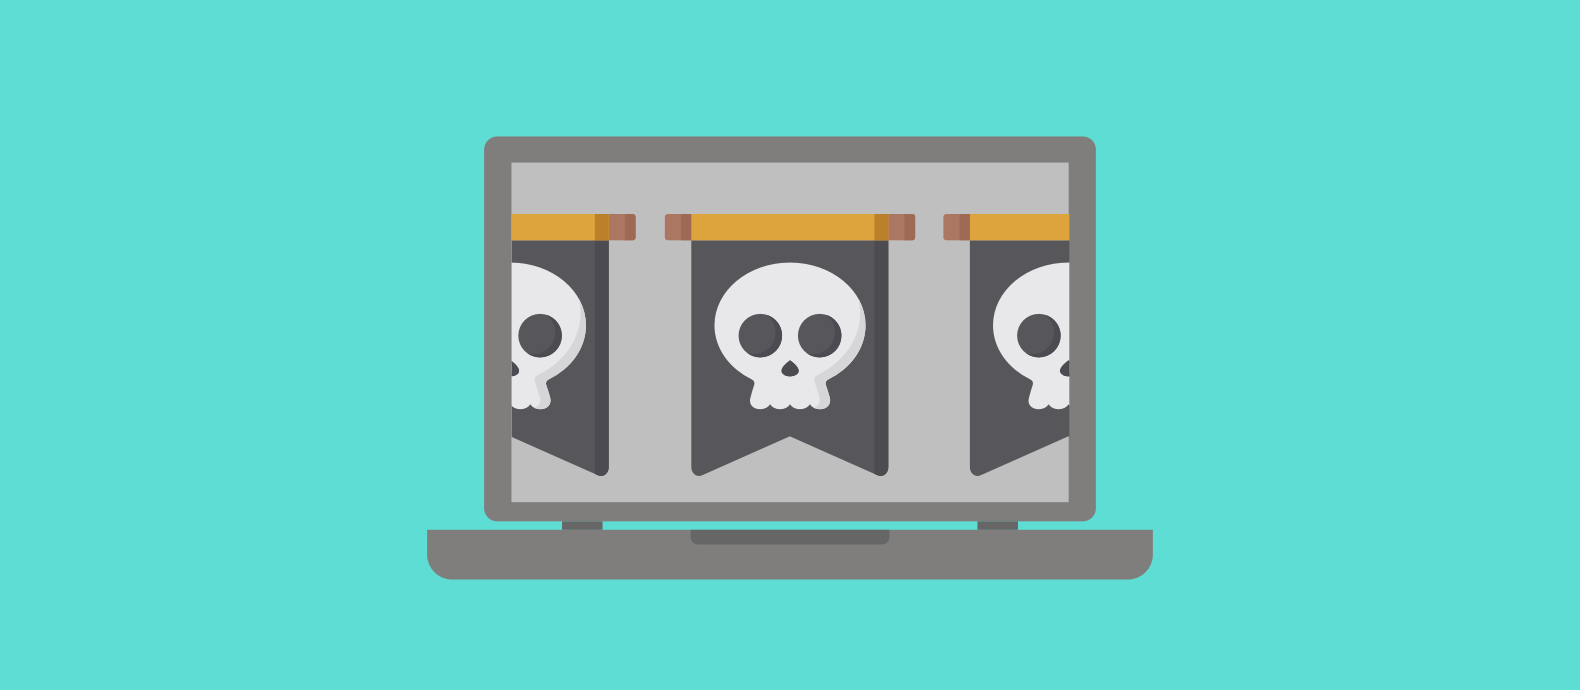 Pirate Matryoshka: The dangers of downloading software from Pirate